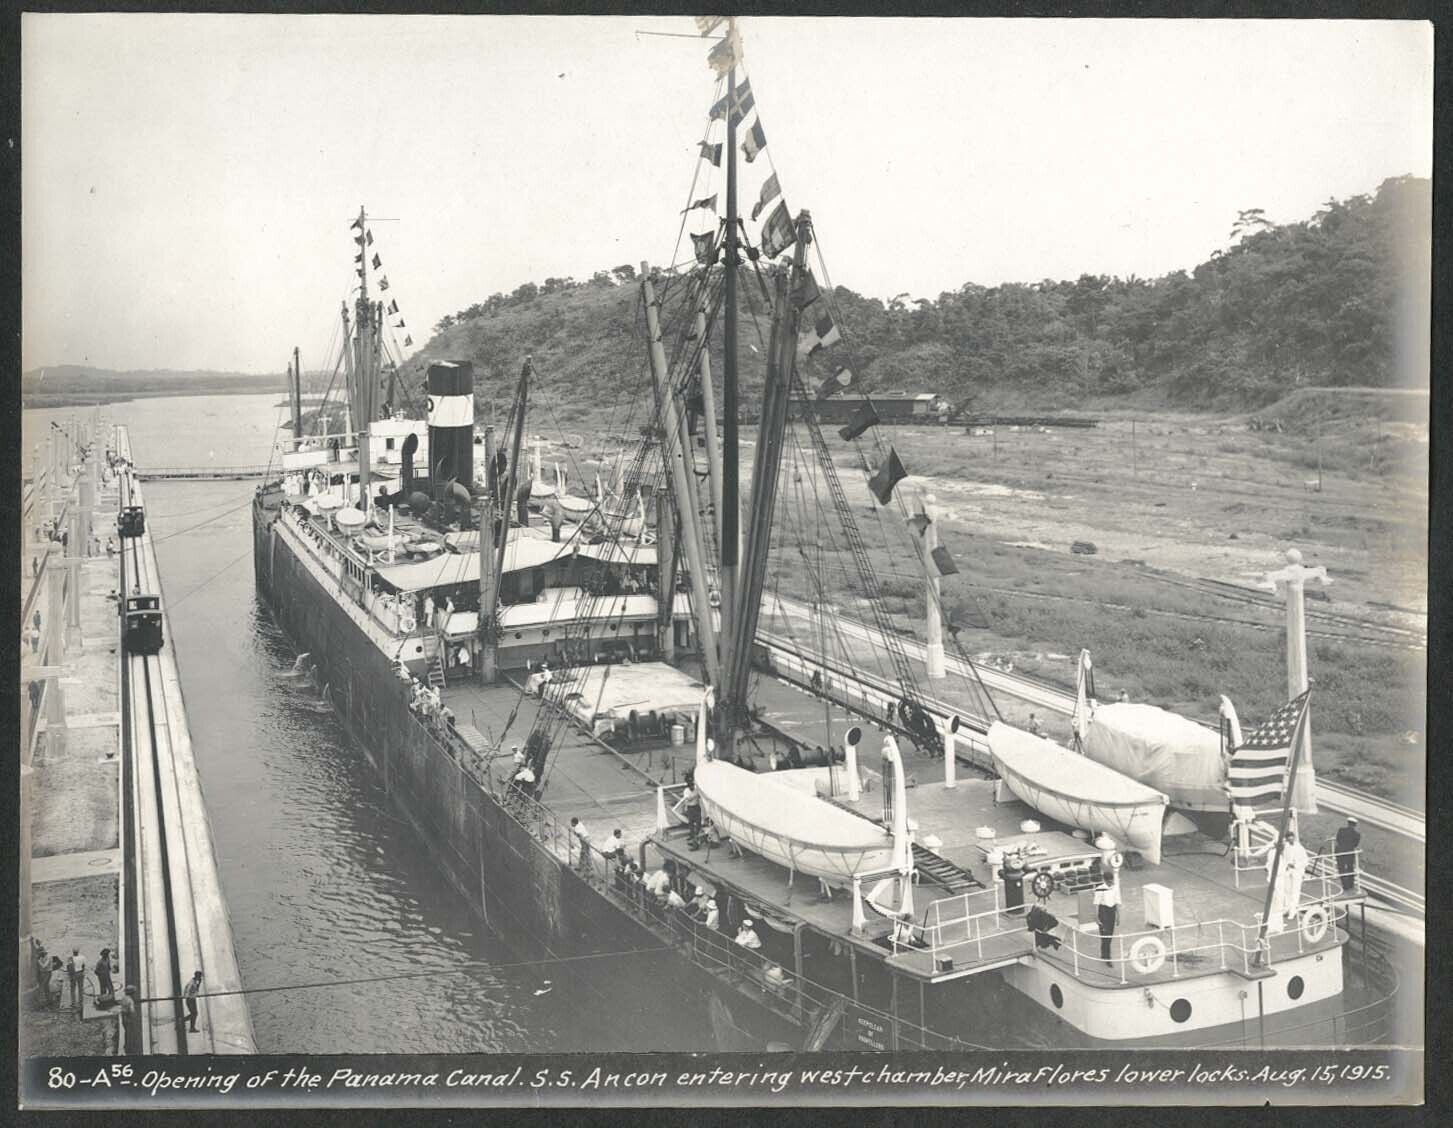 Panama Canal photo 1914 Opening of canal S S Ancon at Mira Flores lower locks